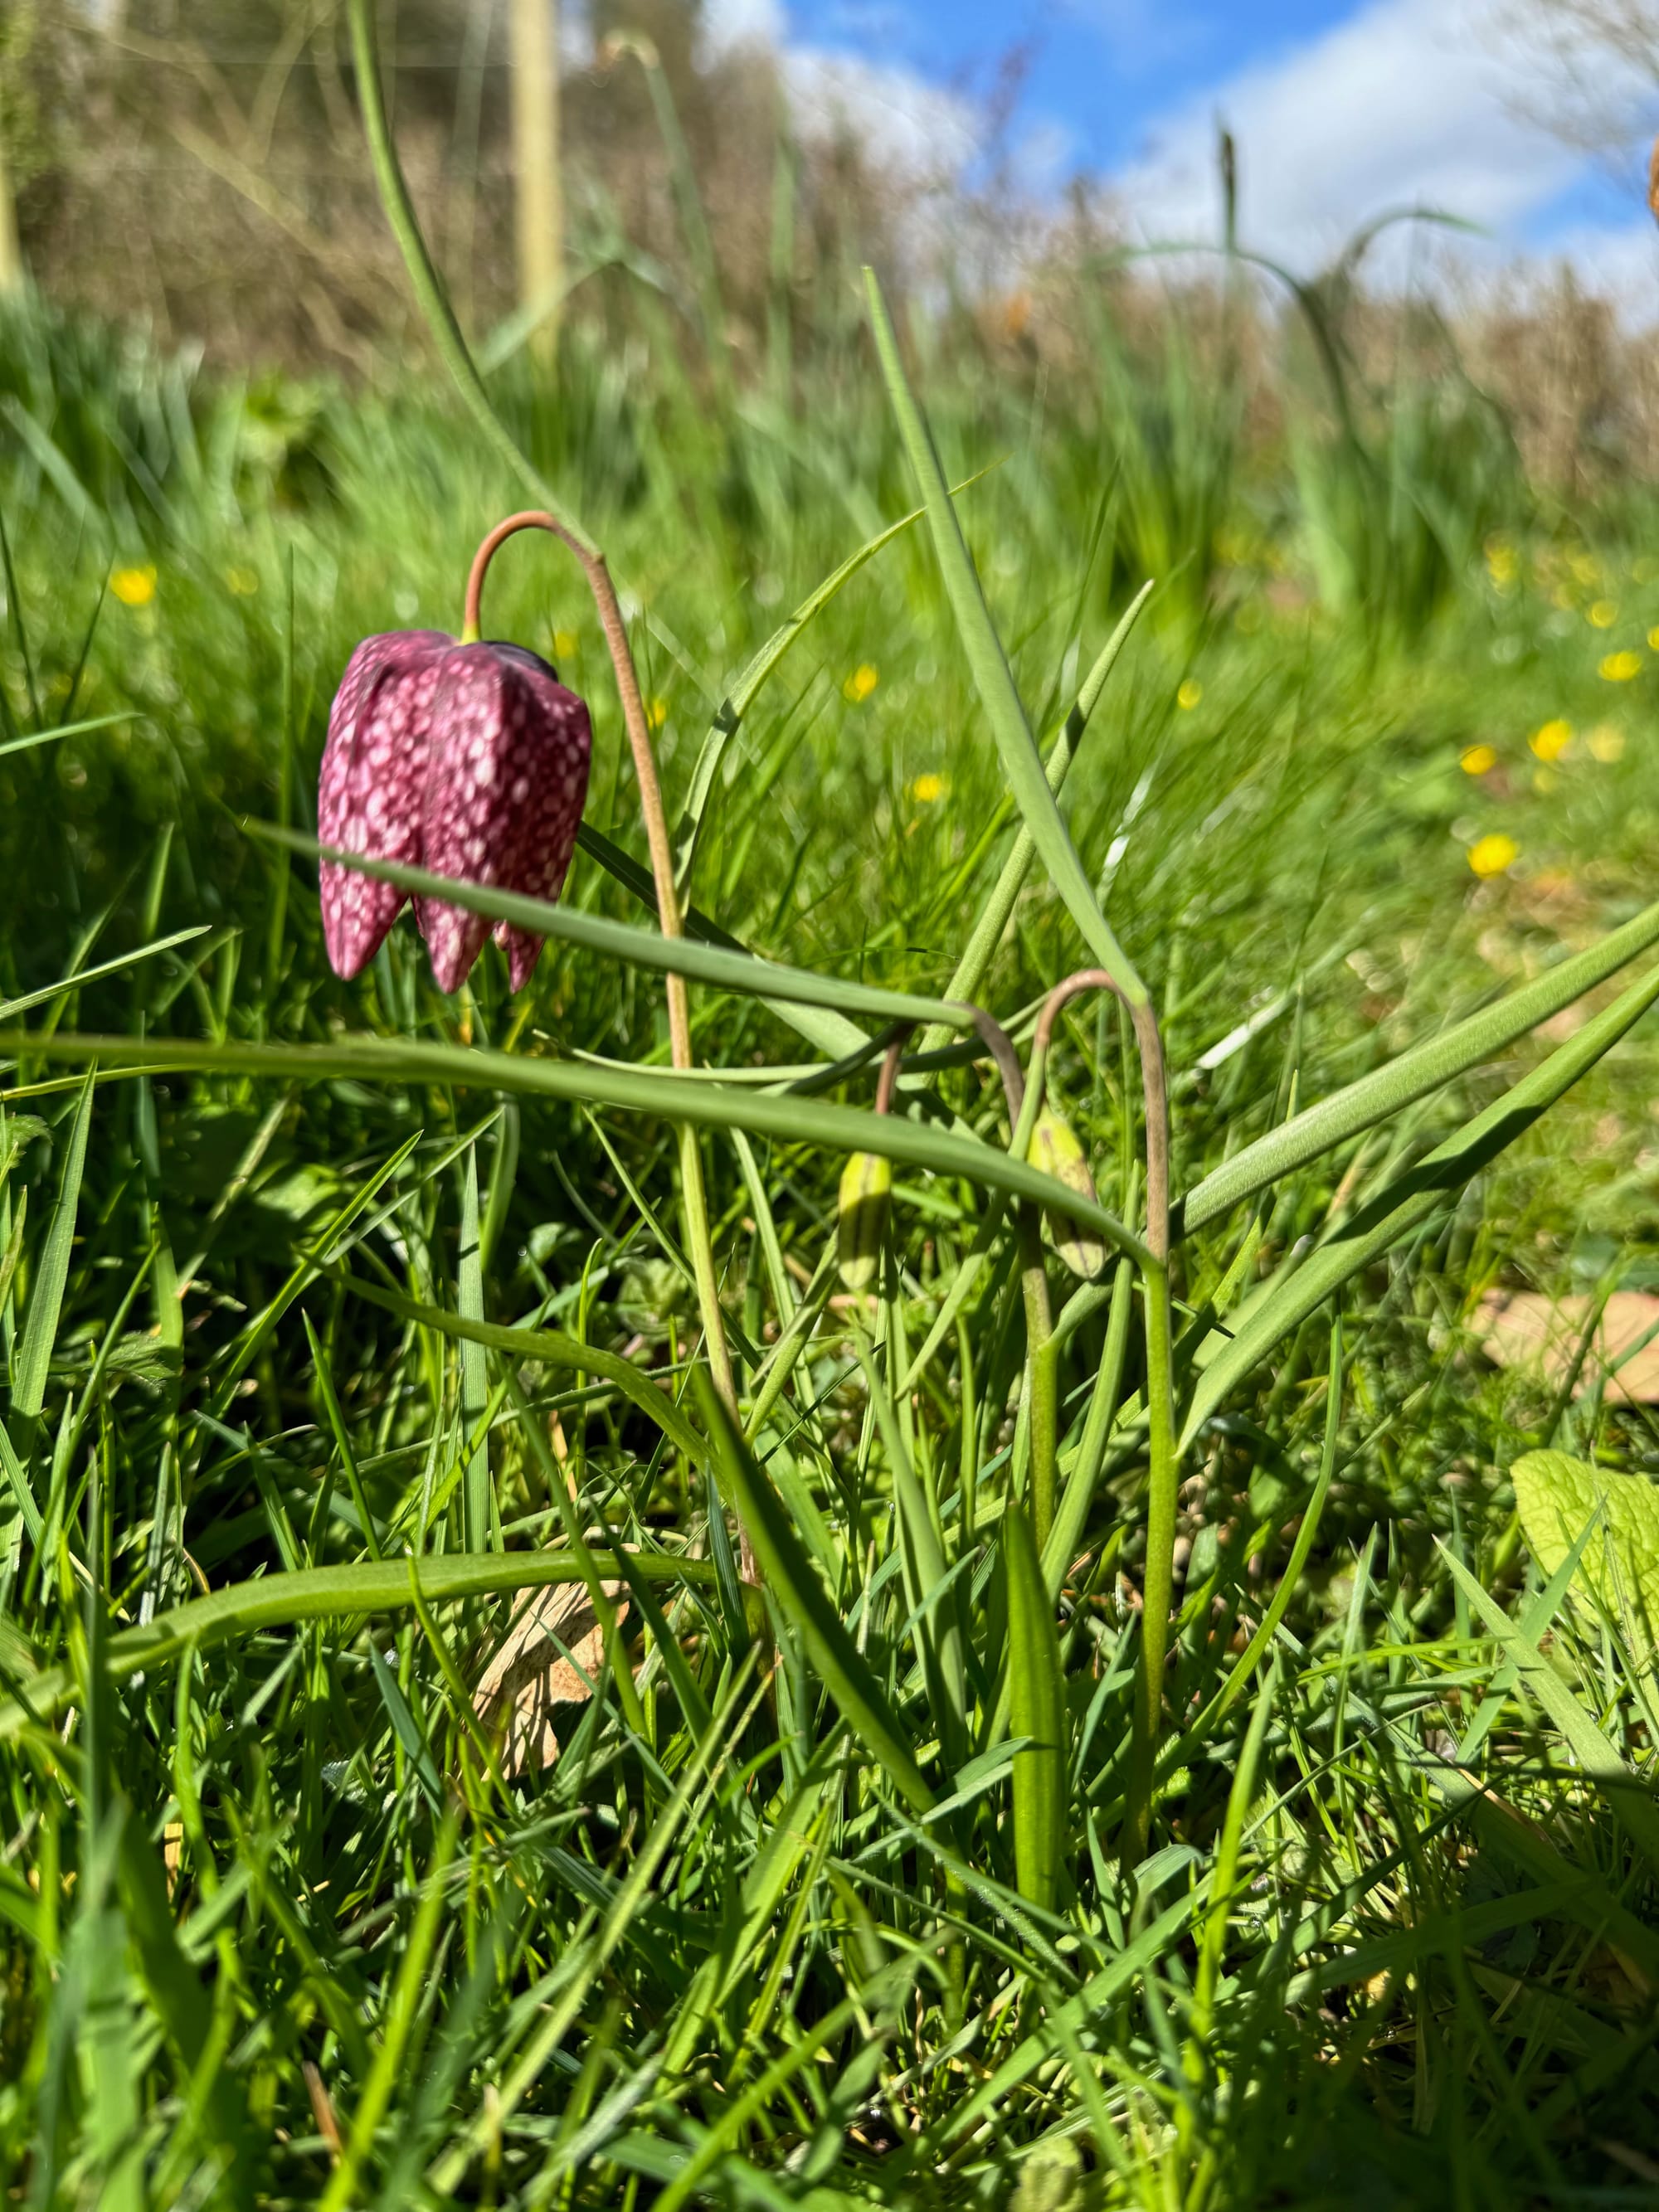 A lawn with long bright green grass with a single arched stem of snakeshead fritillaria. The blooming flower is dark pink to maroon with a checkerboard pattern. Two smaller, as yet unopened, buds are suspended on long stems to the right. 